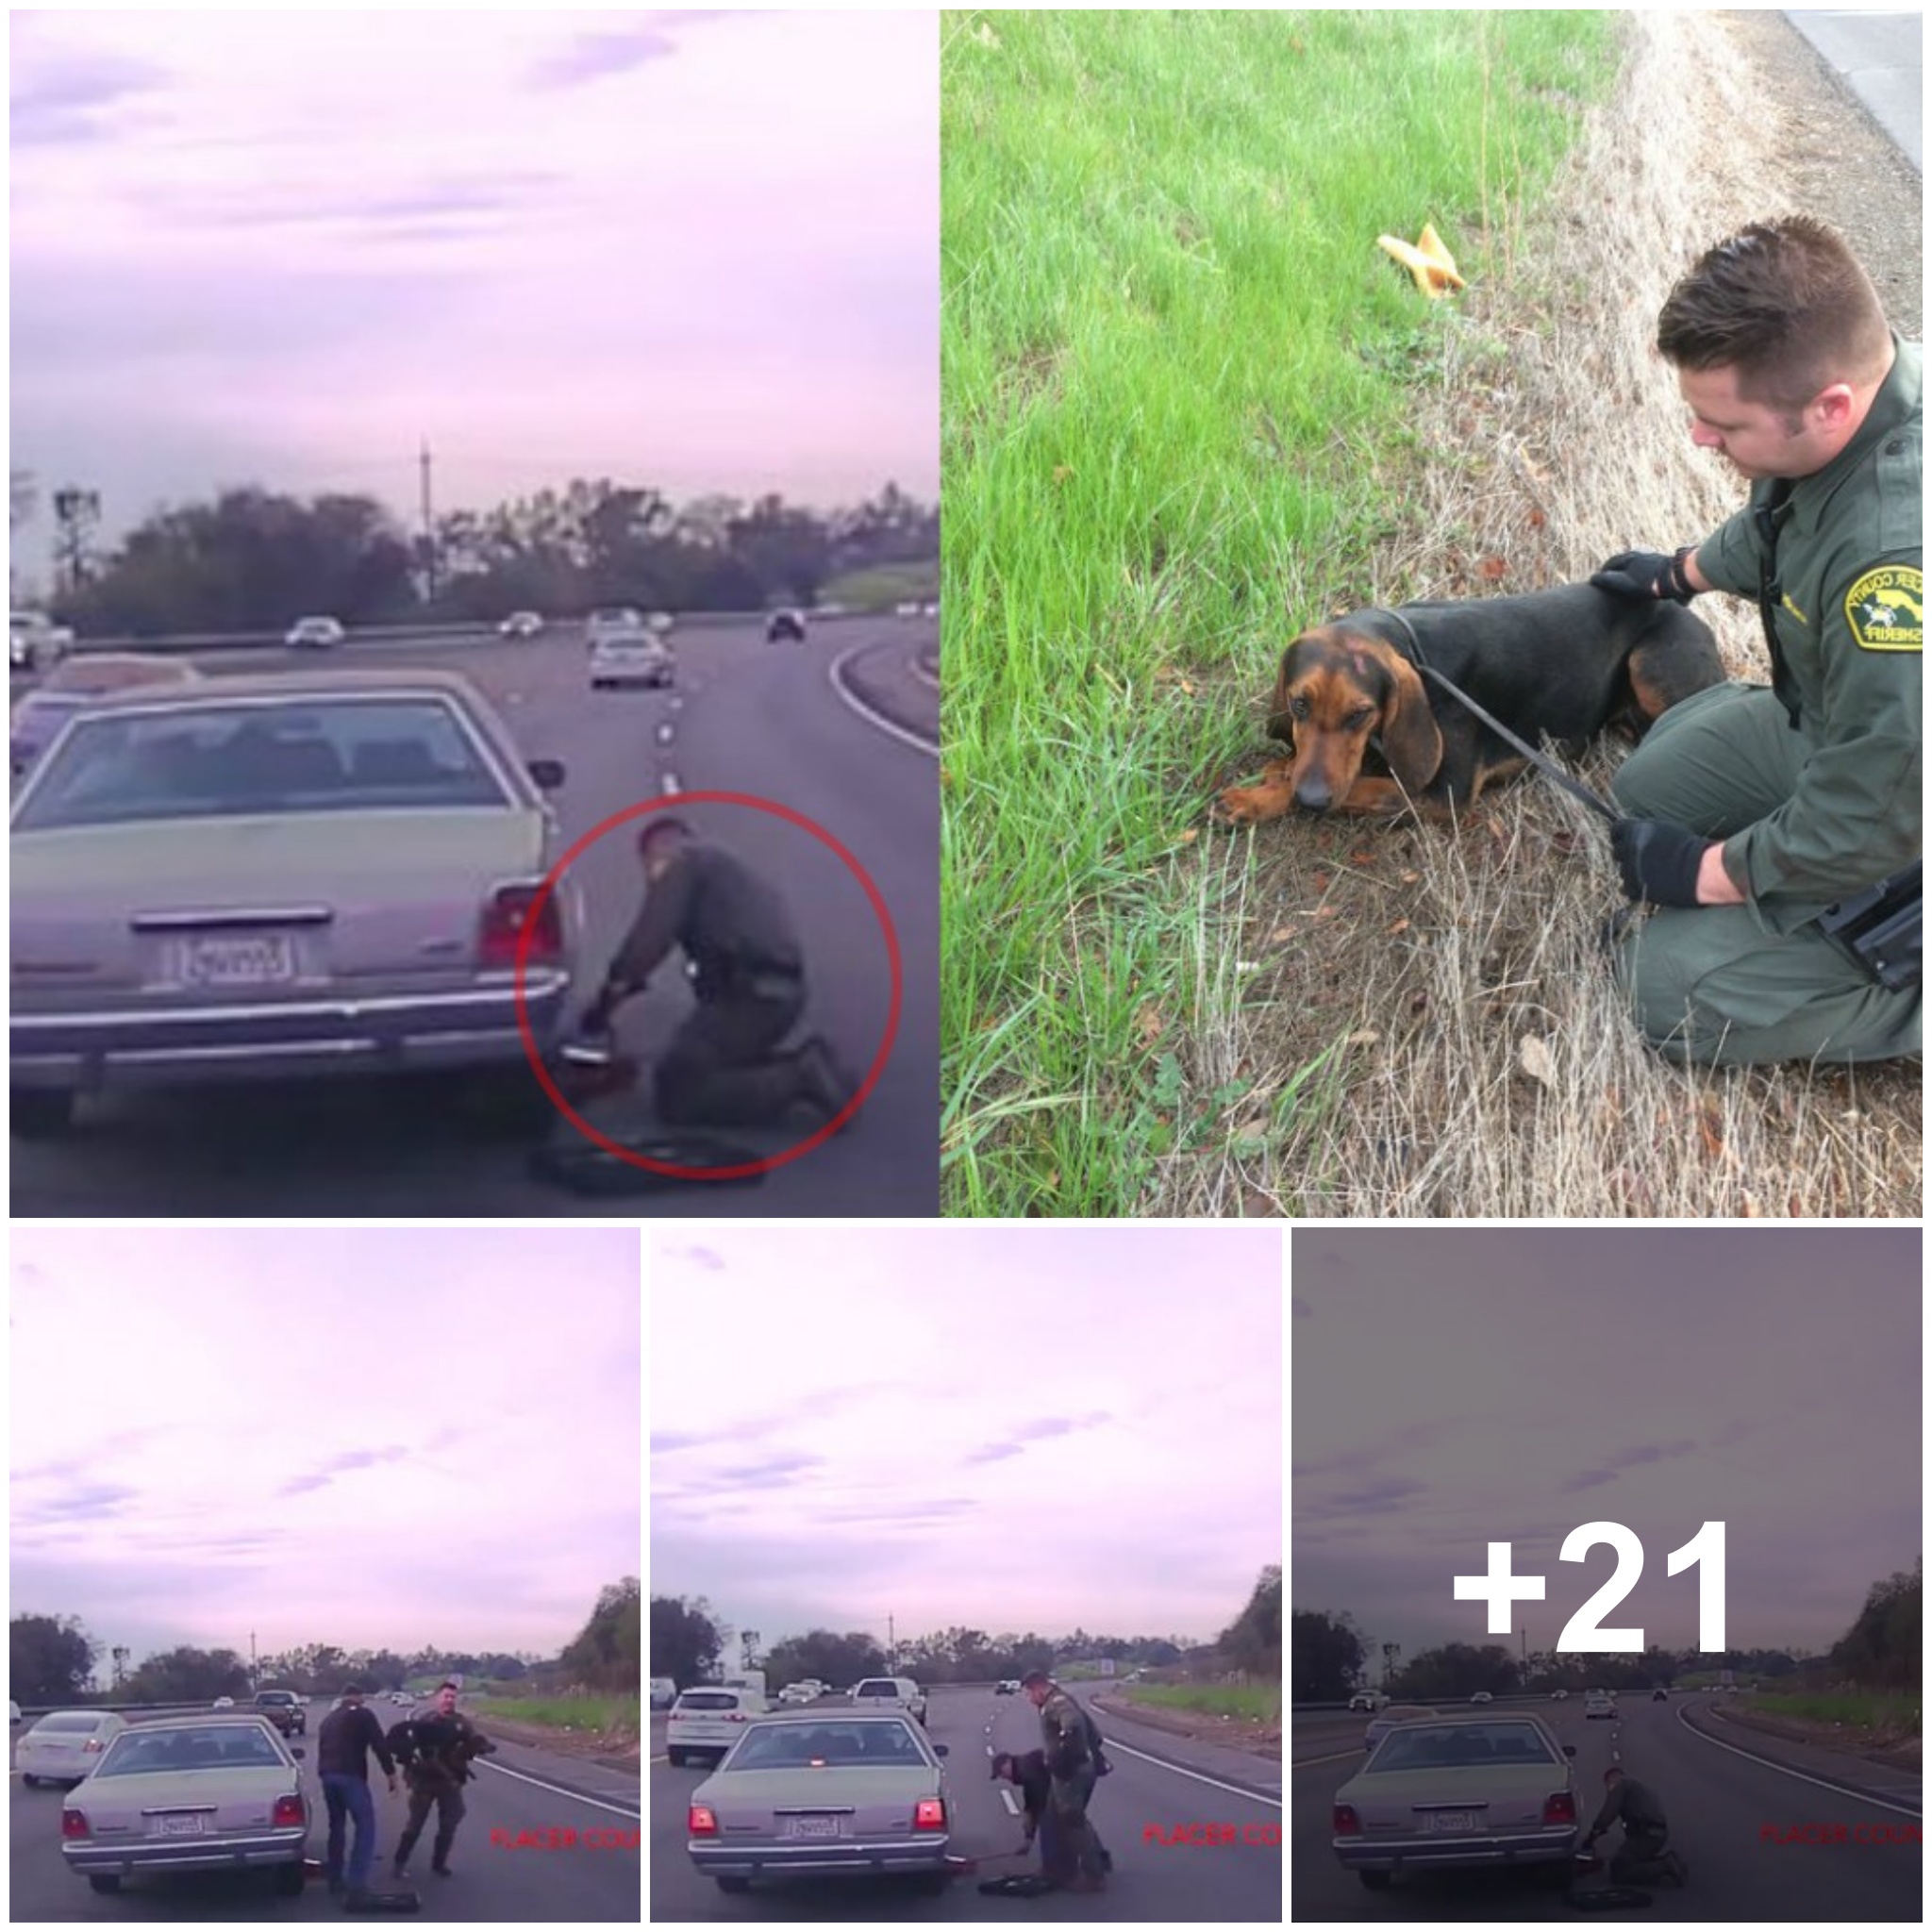 Excitedly following the heroic officers rescuing a hunting dog trapped under a car on a busy highway, the moment everyone got him out was heart-stopping.